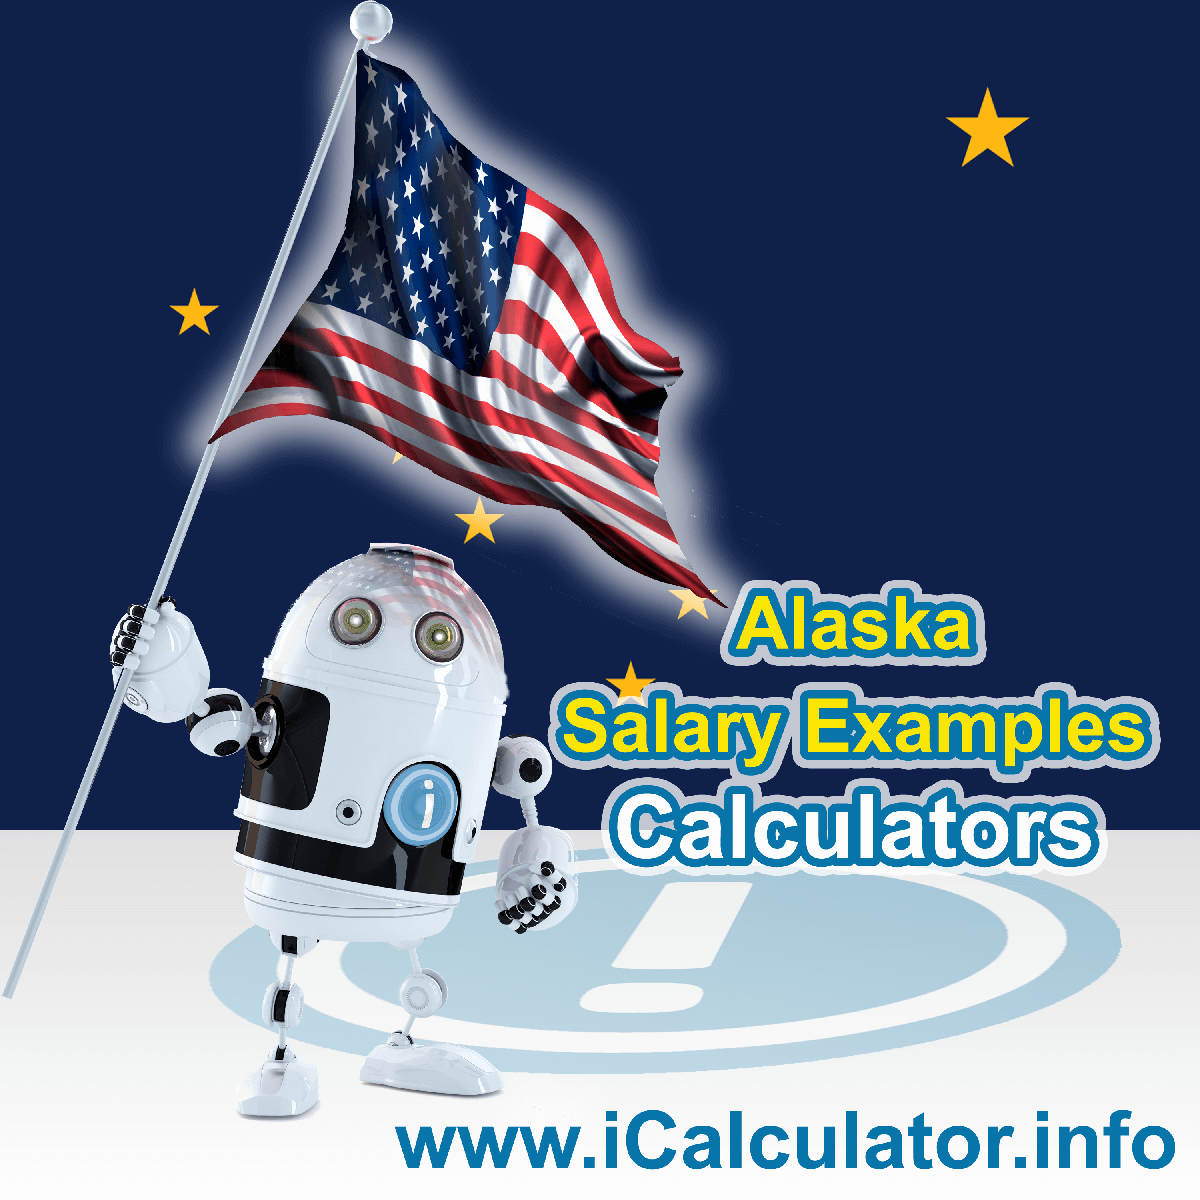 Alaska Salary Example for $ 60,000.00 in 2023 | iCalculator™ | $ 60,000.00 salary example for employee and employer paying Alaska State tincome taxes. Detailed salary after tax calculation including Alaska State Tax, Federal State Tax, Medicare Deductions, Social Security, Capital Gains and other income tax and salary deductions complete with supporting Alaska state tax tables 